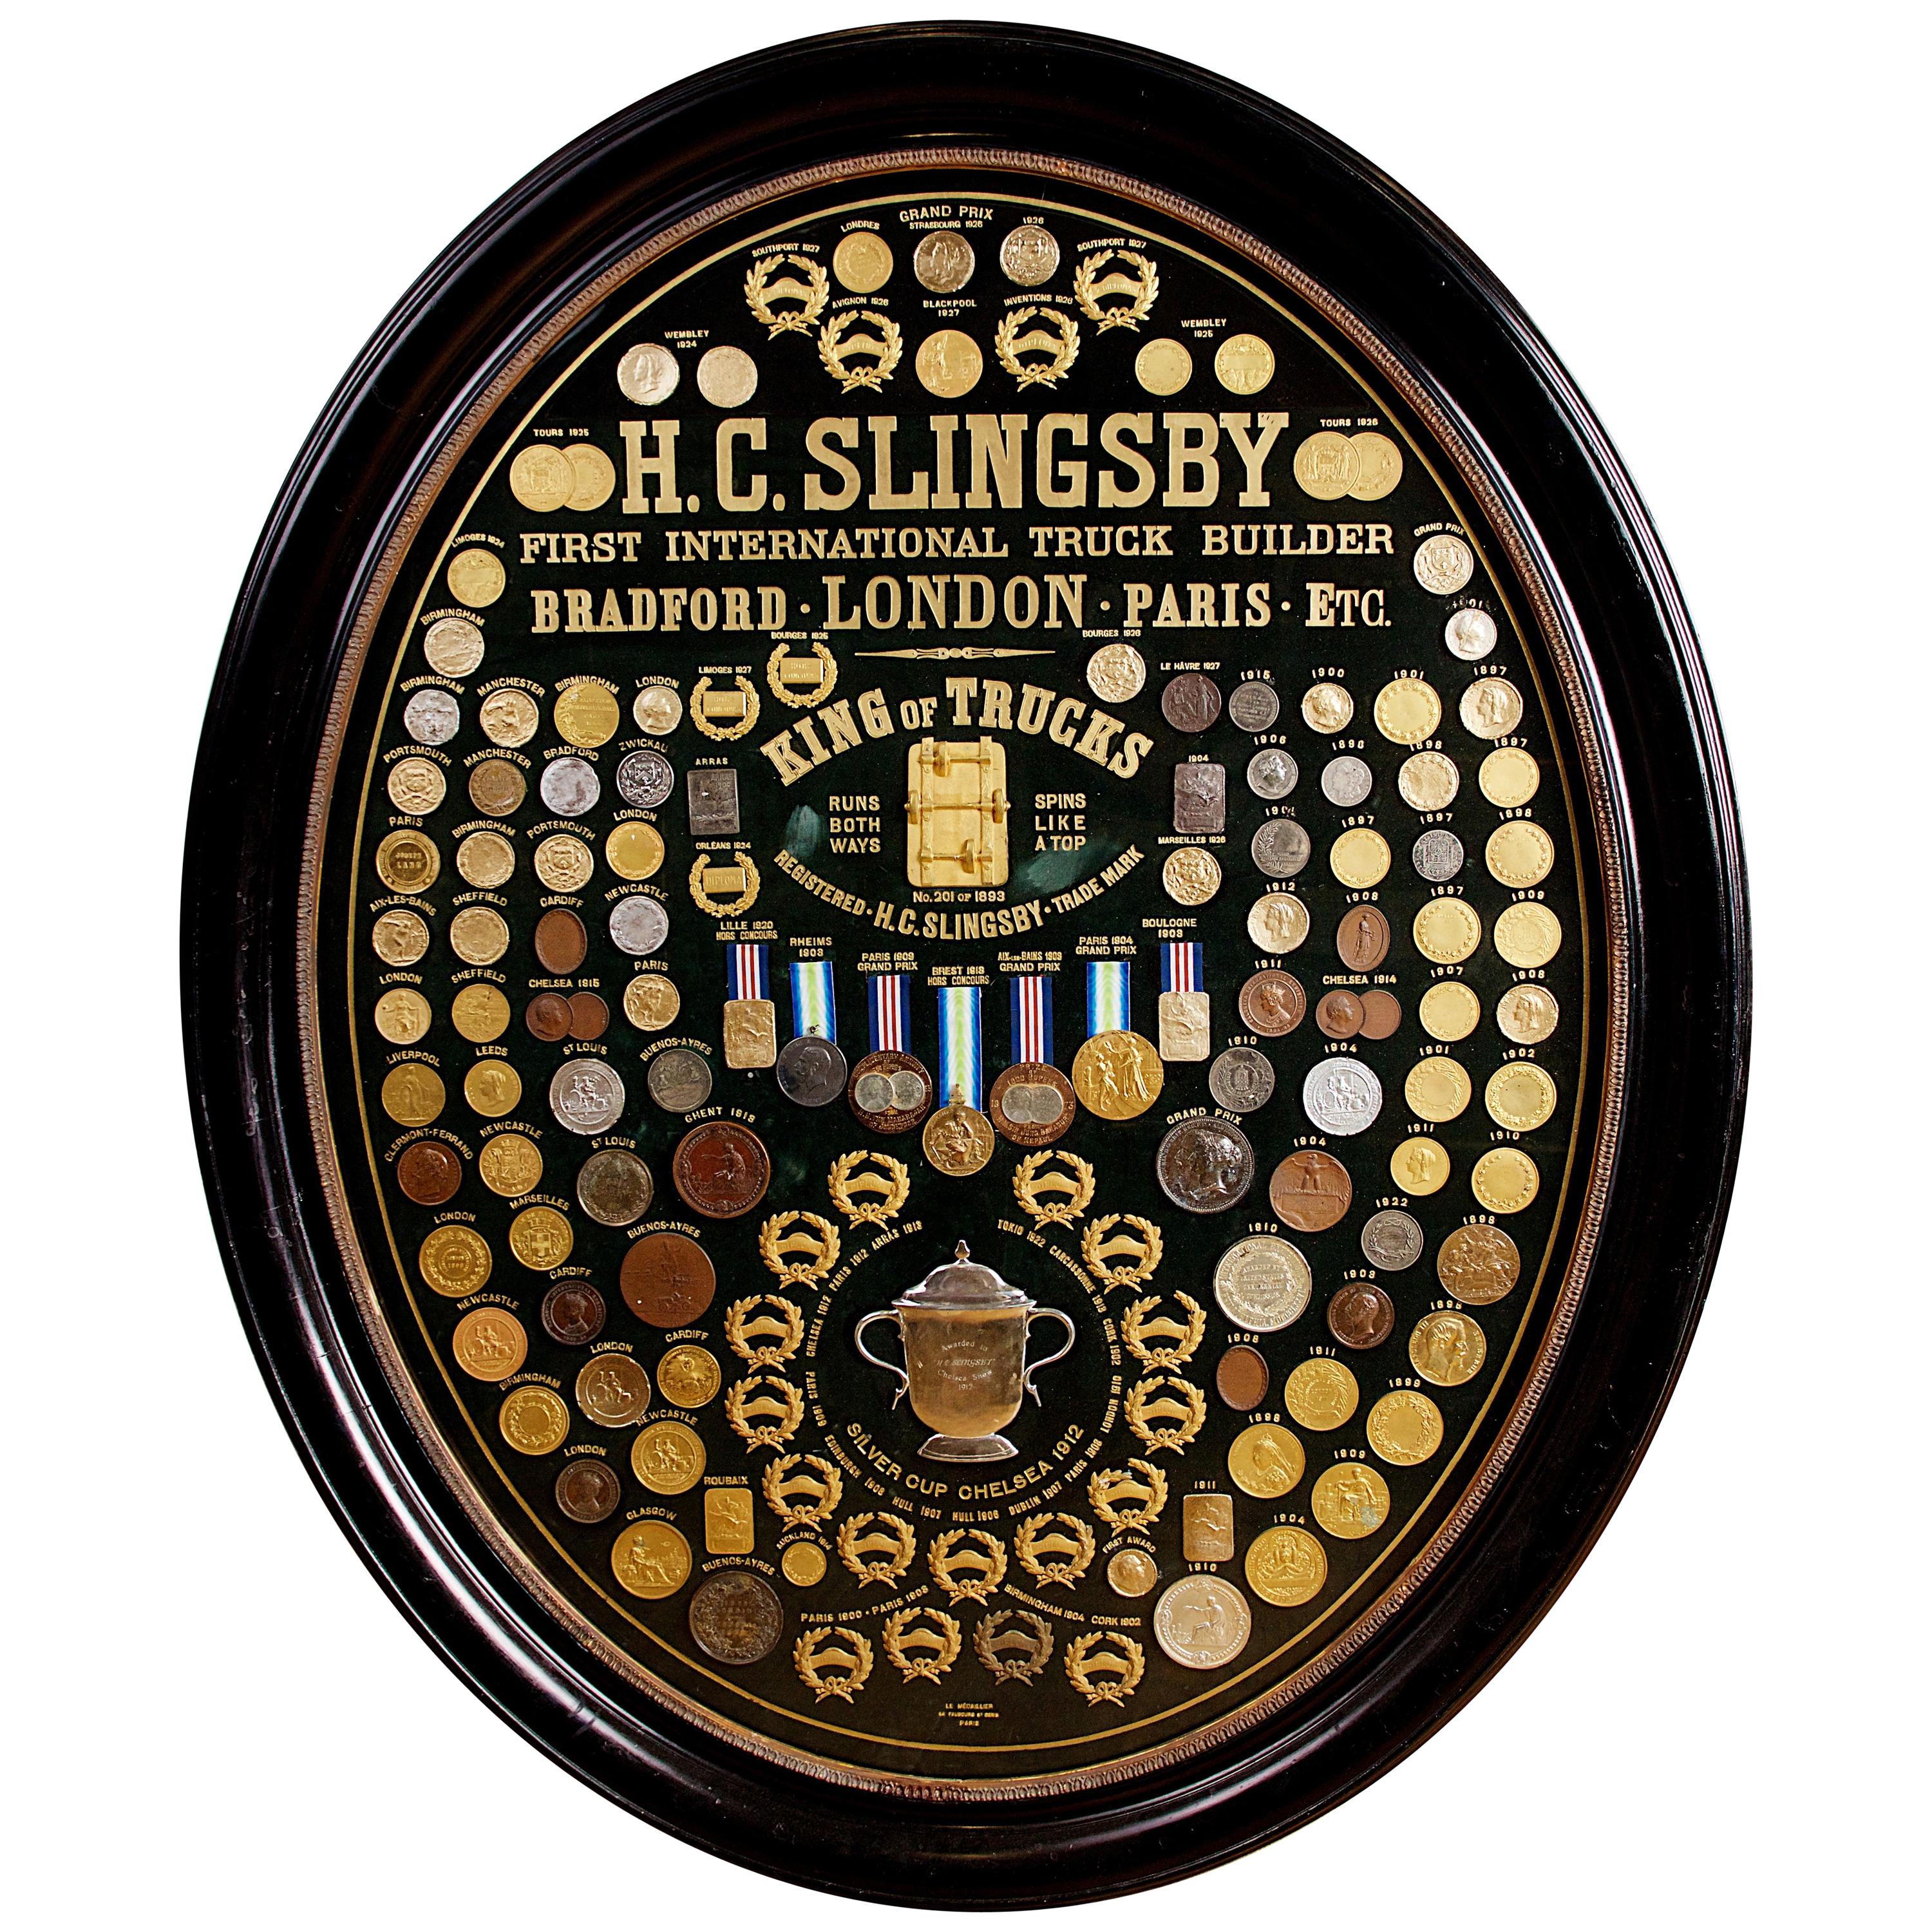 Display of Medals from H.C. Slingsby Truck Company, Set in Large Oval Frame For Sale